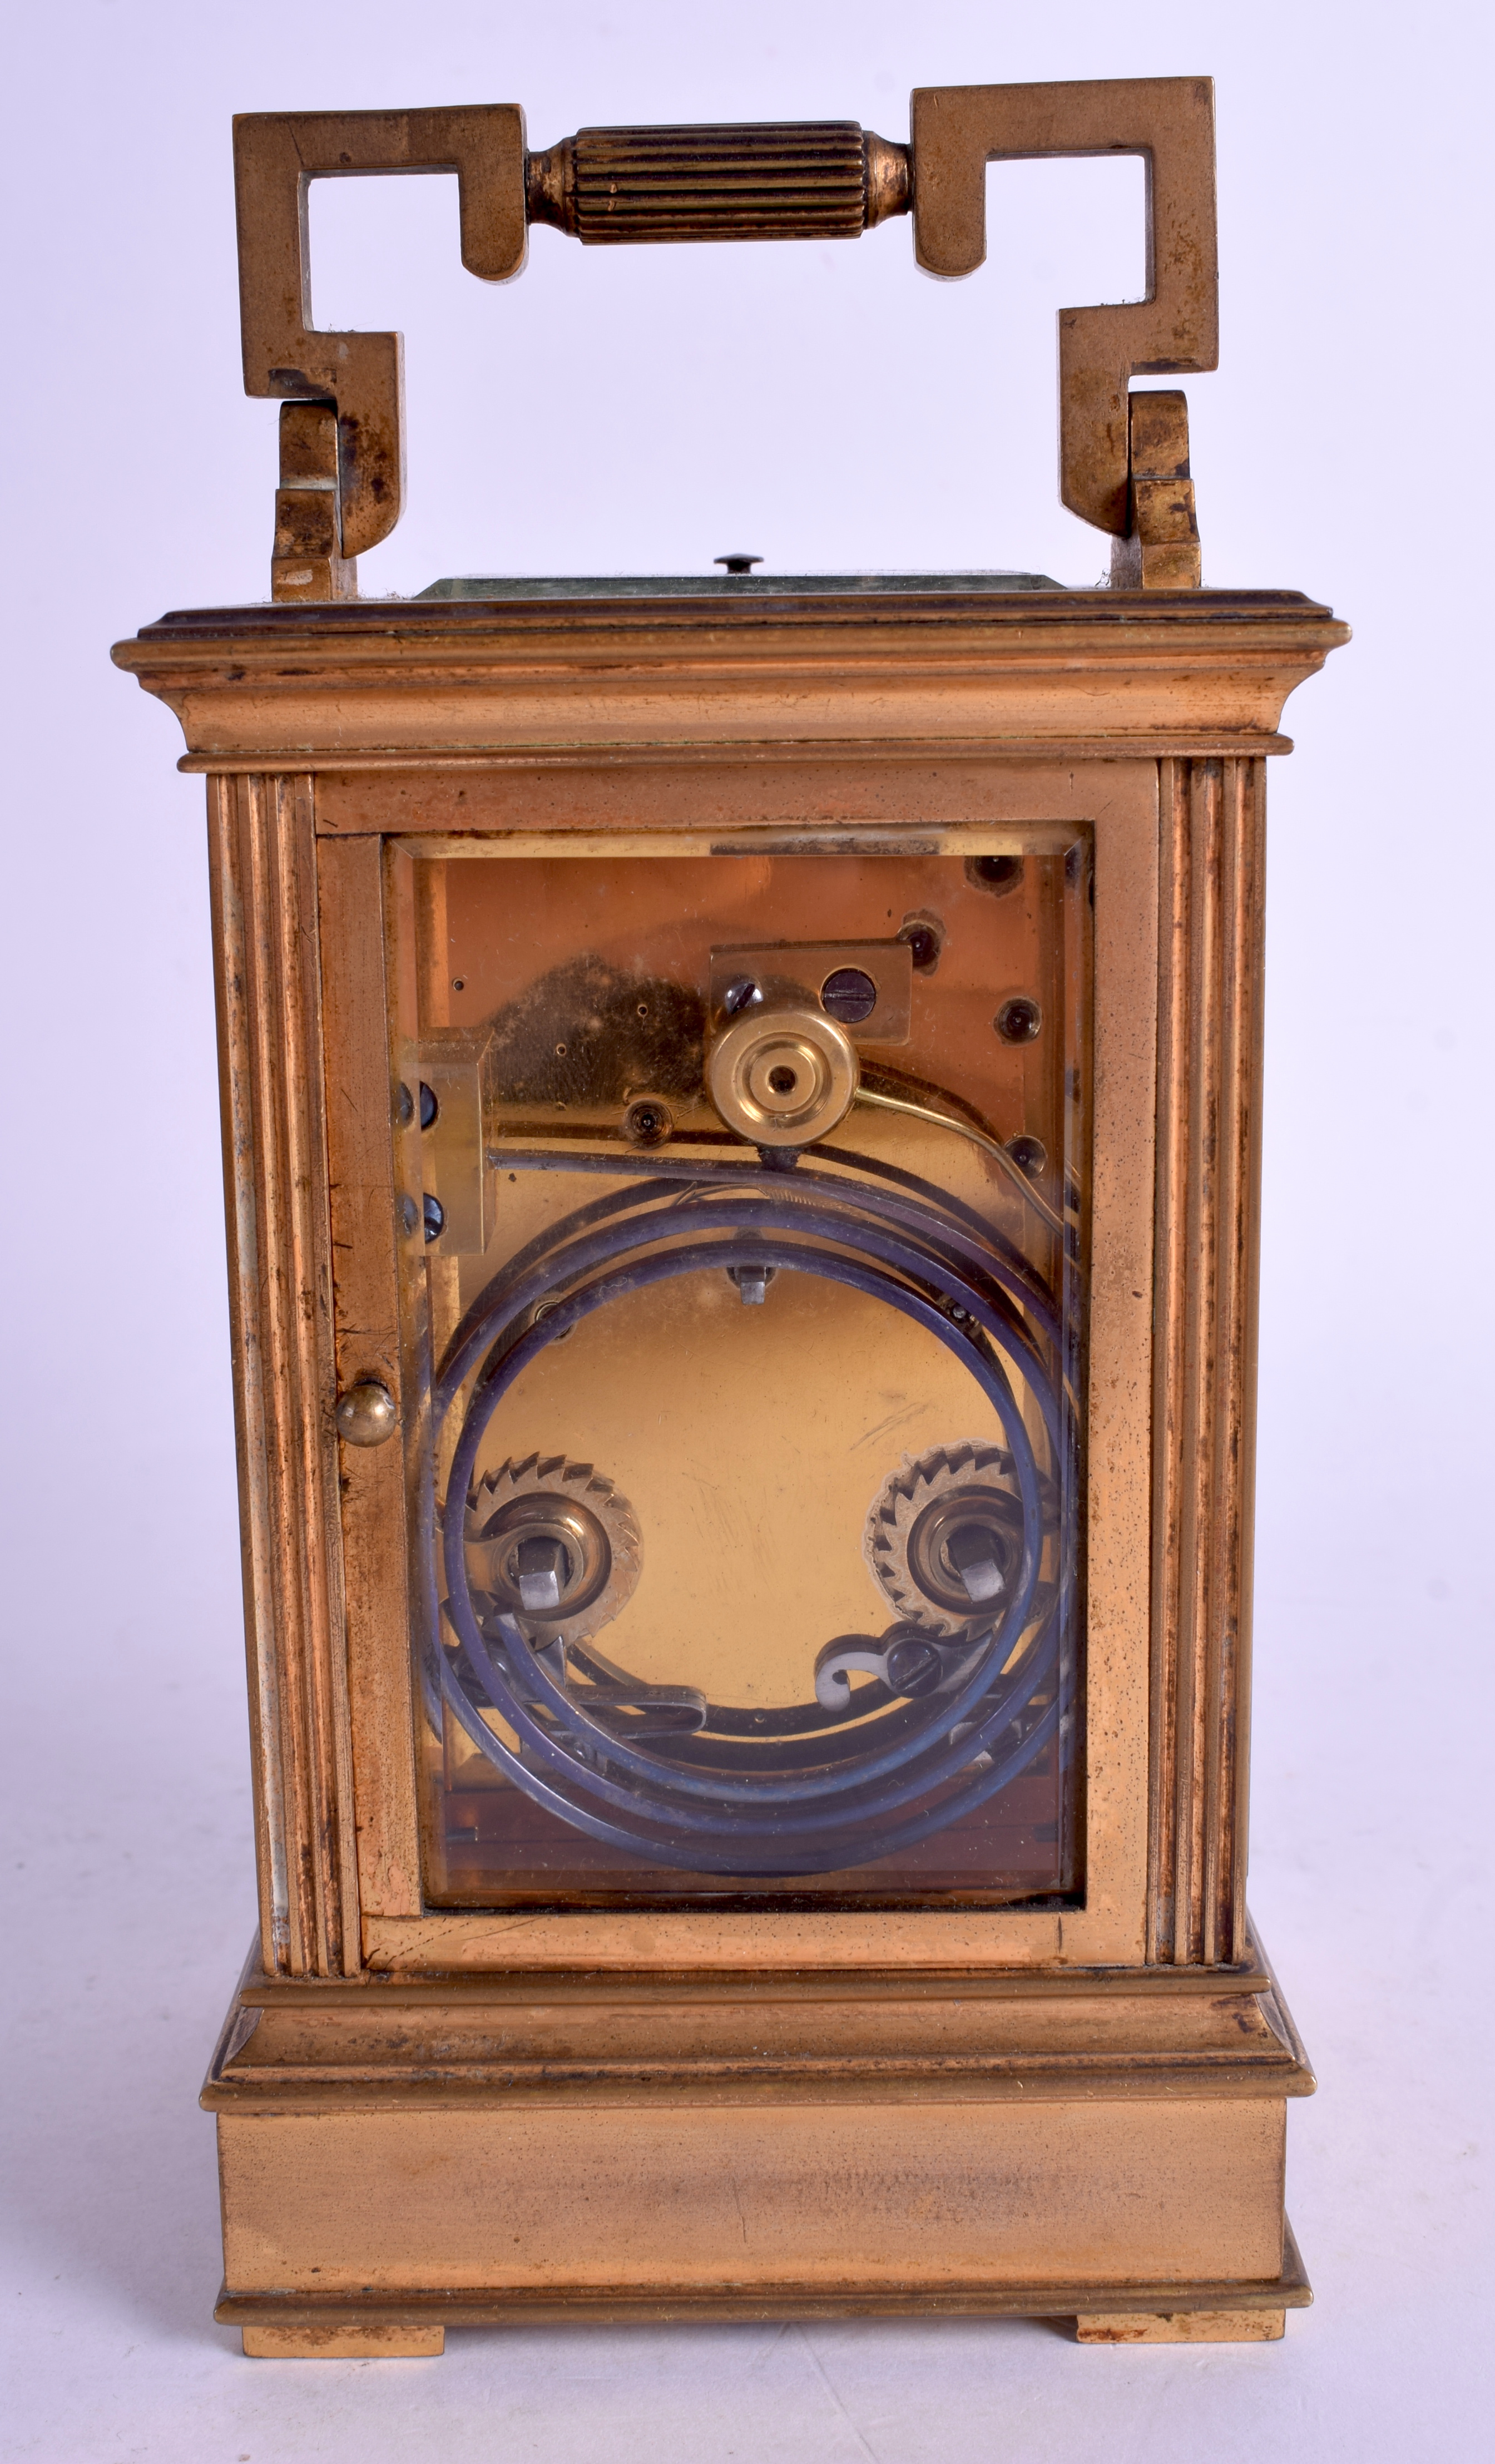 AN ANTIQUE FRENCH REPEATING BRASS CARRIAGE CLOCK. 17 cm high inc handle. - Image 3 of 4